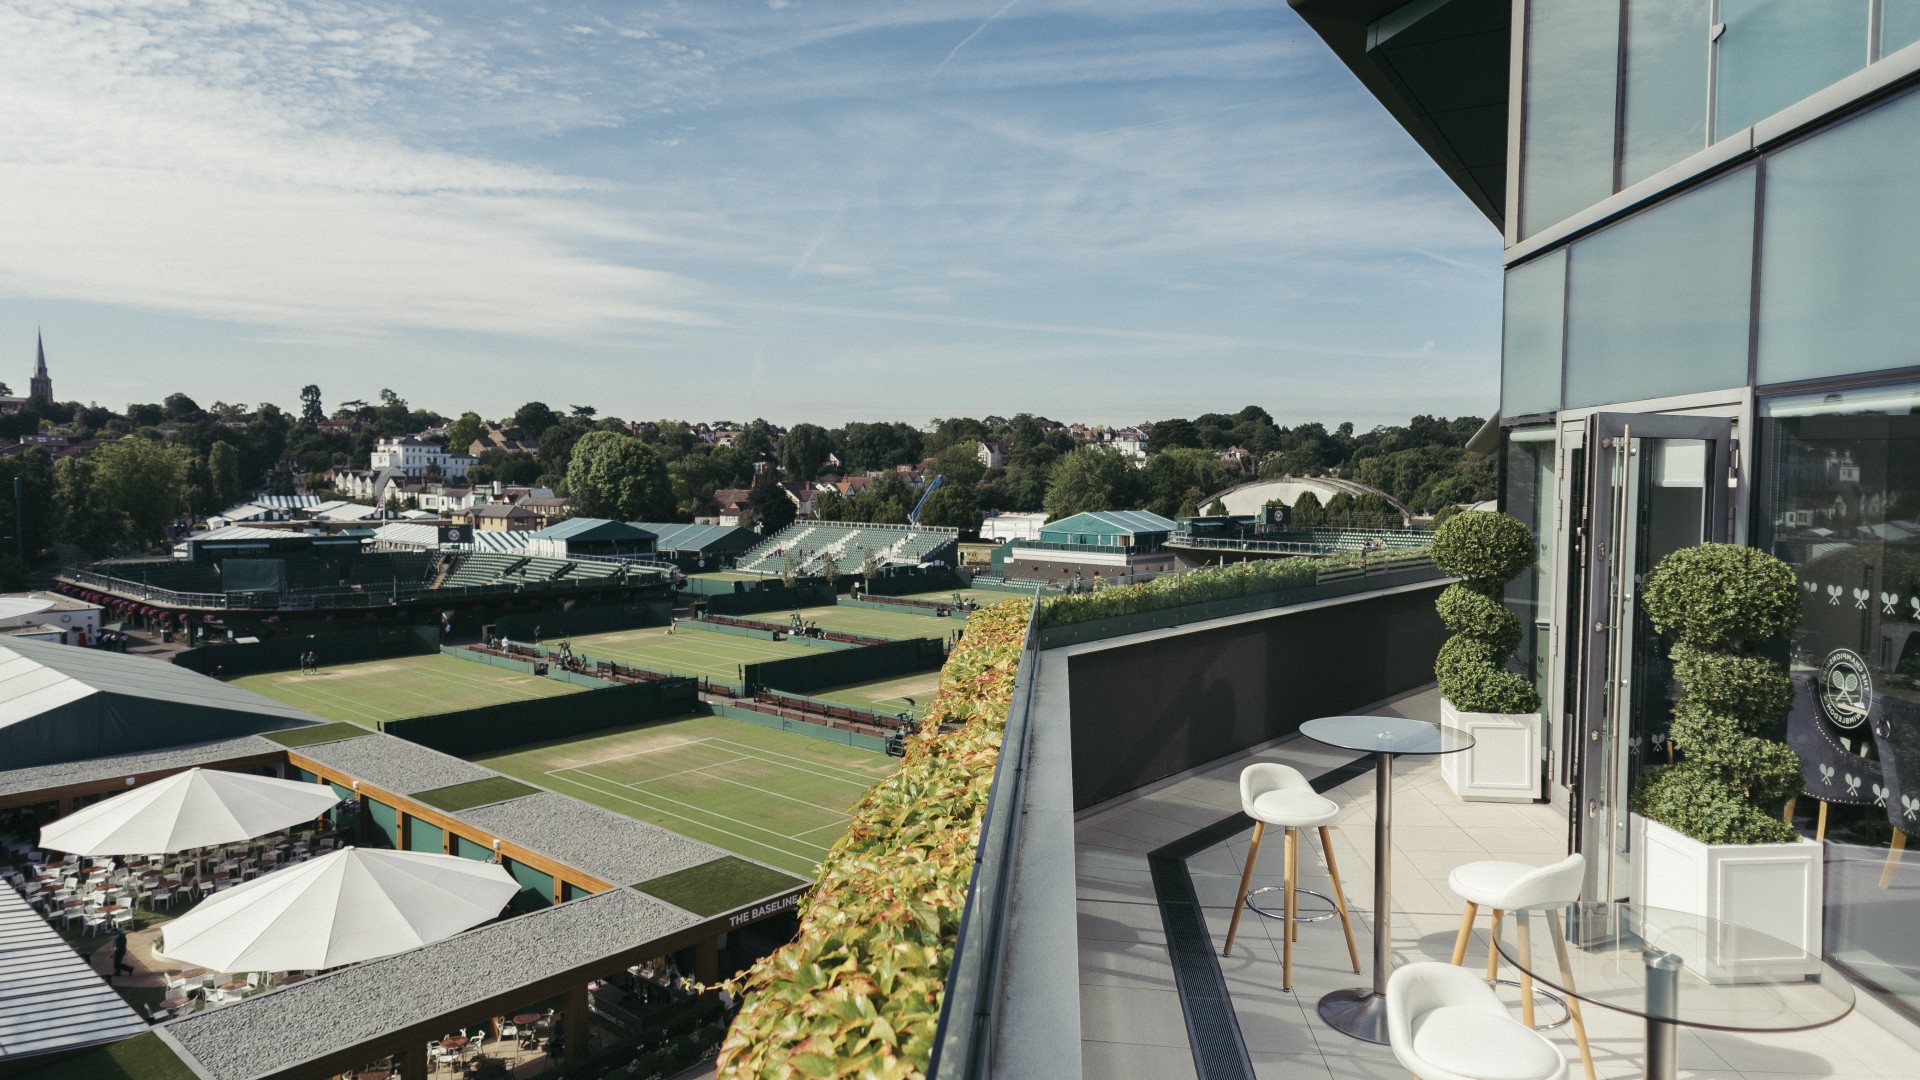 Your Wimbledon Centre Court seat is waiting | Square Mile